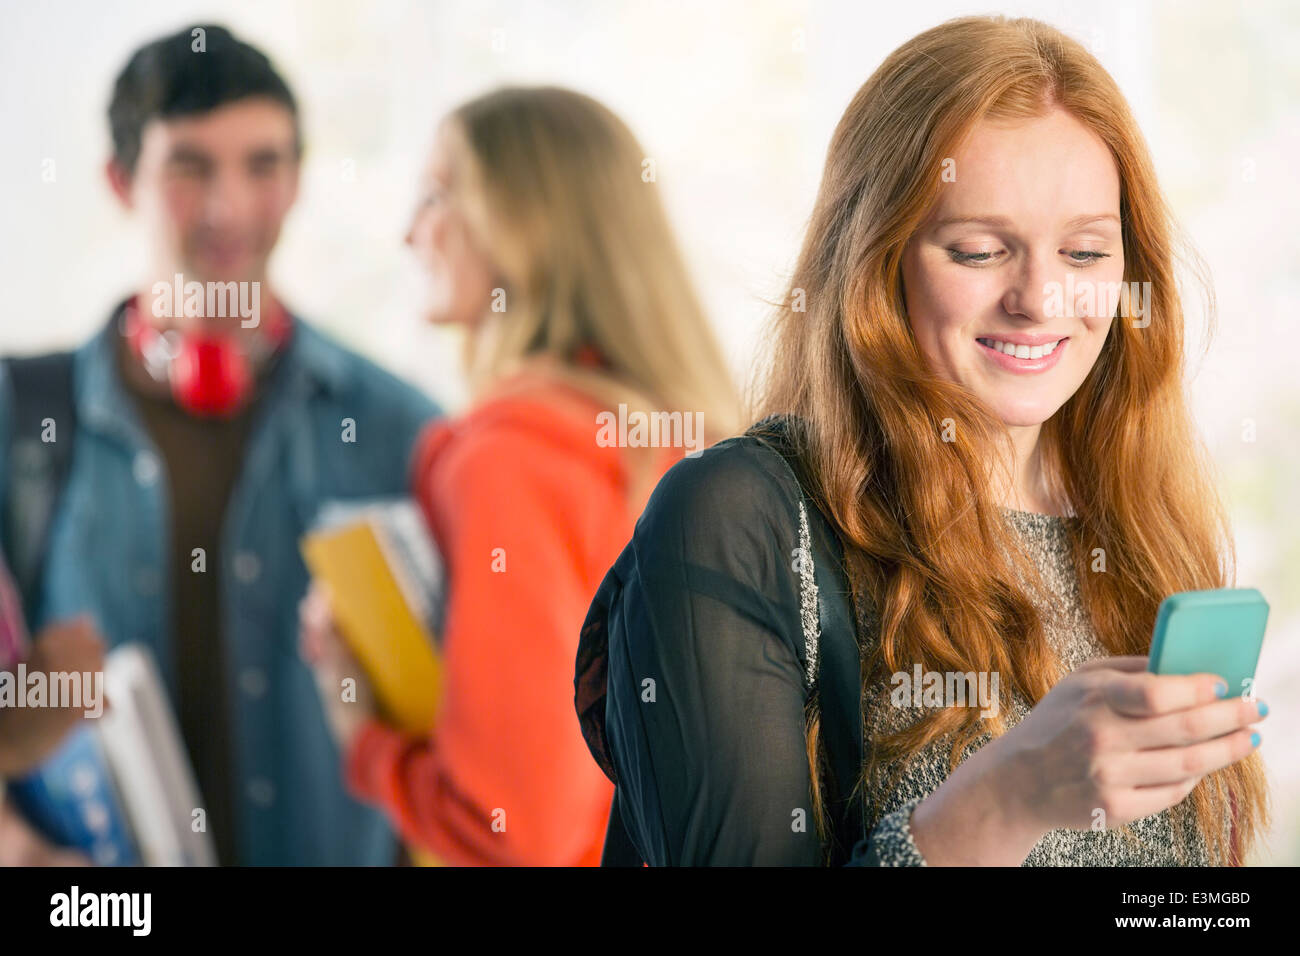 College student text messaging with cell phone Banque D'Images